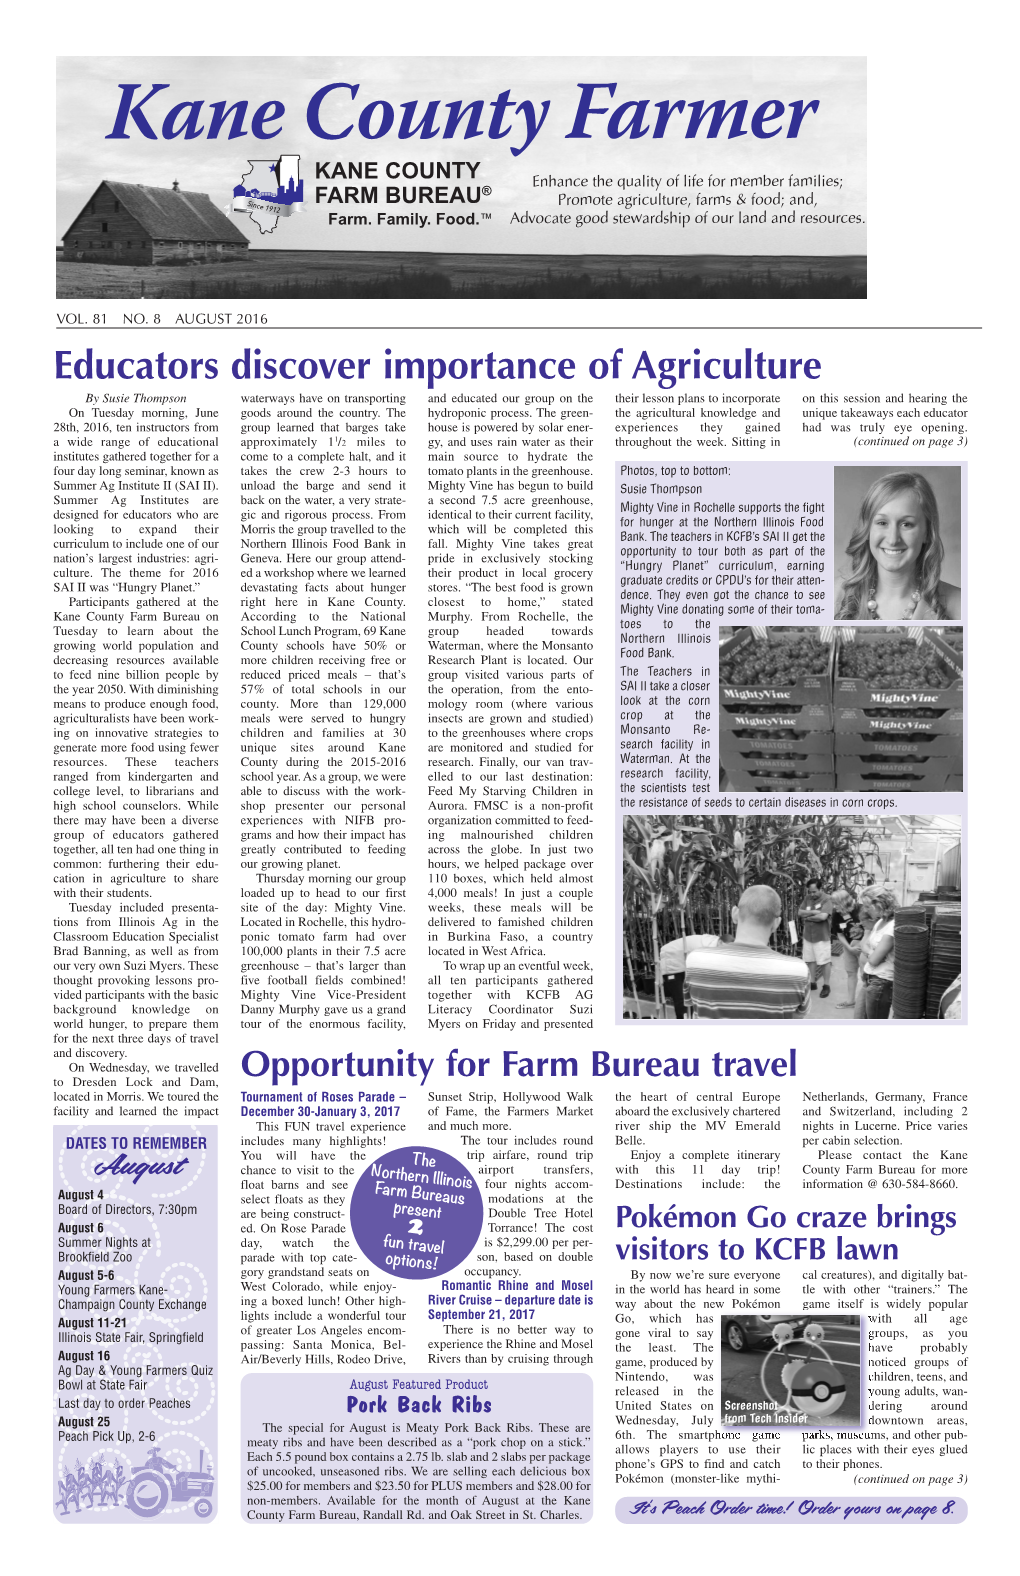 Educators Discover Importance of Agriculture